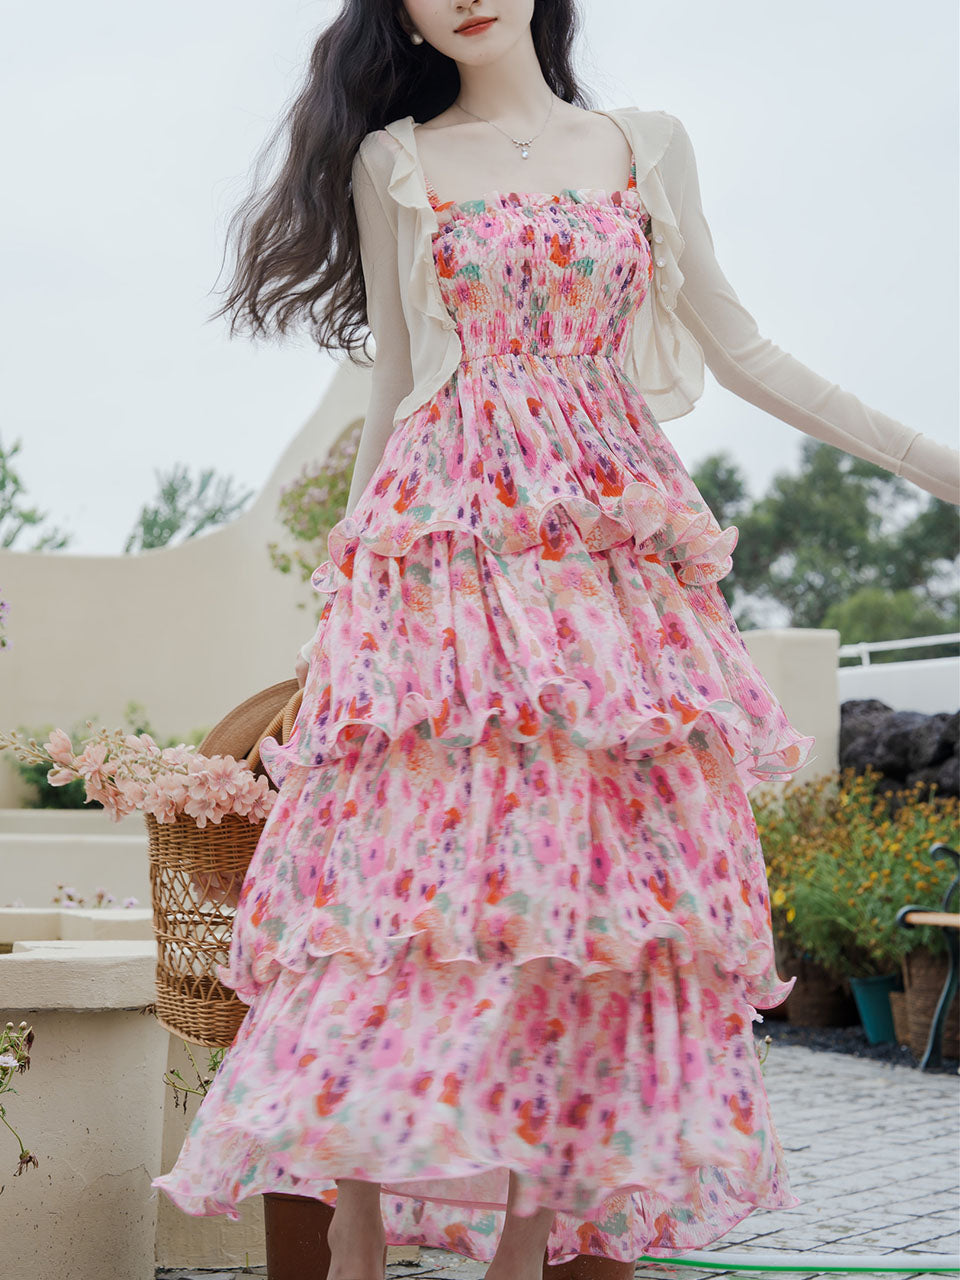 2PS Pink Floral Print Ruffles Strap Dress With White Cardigan